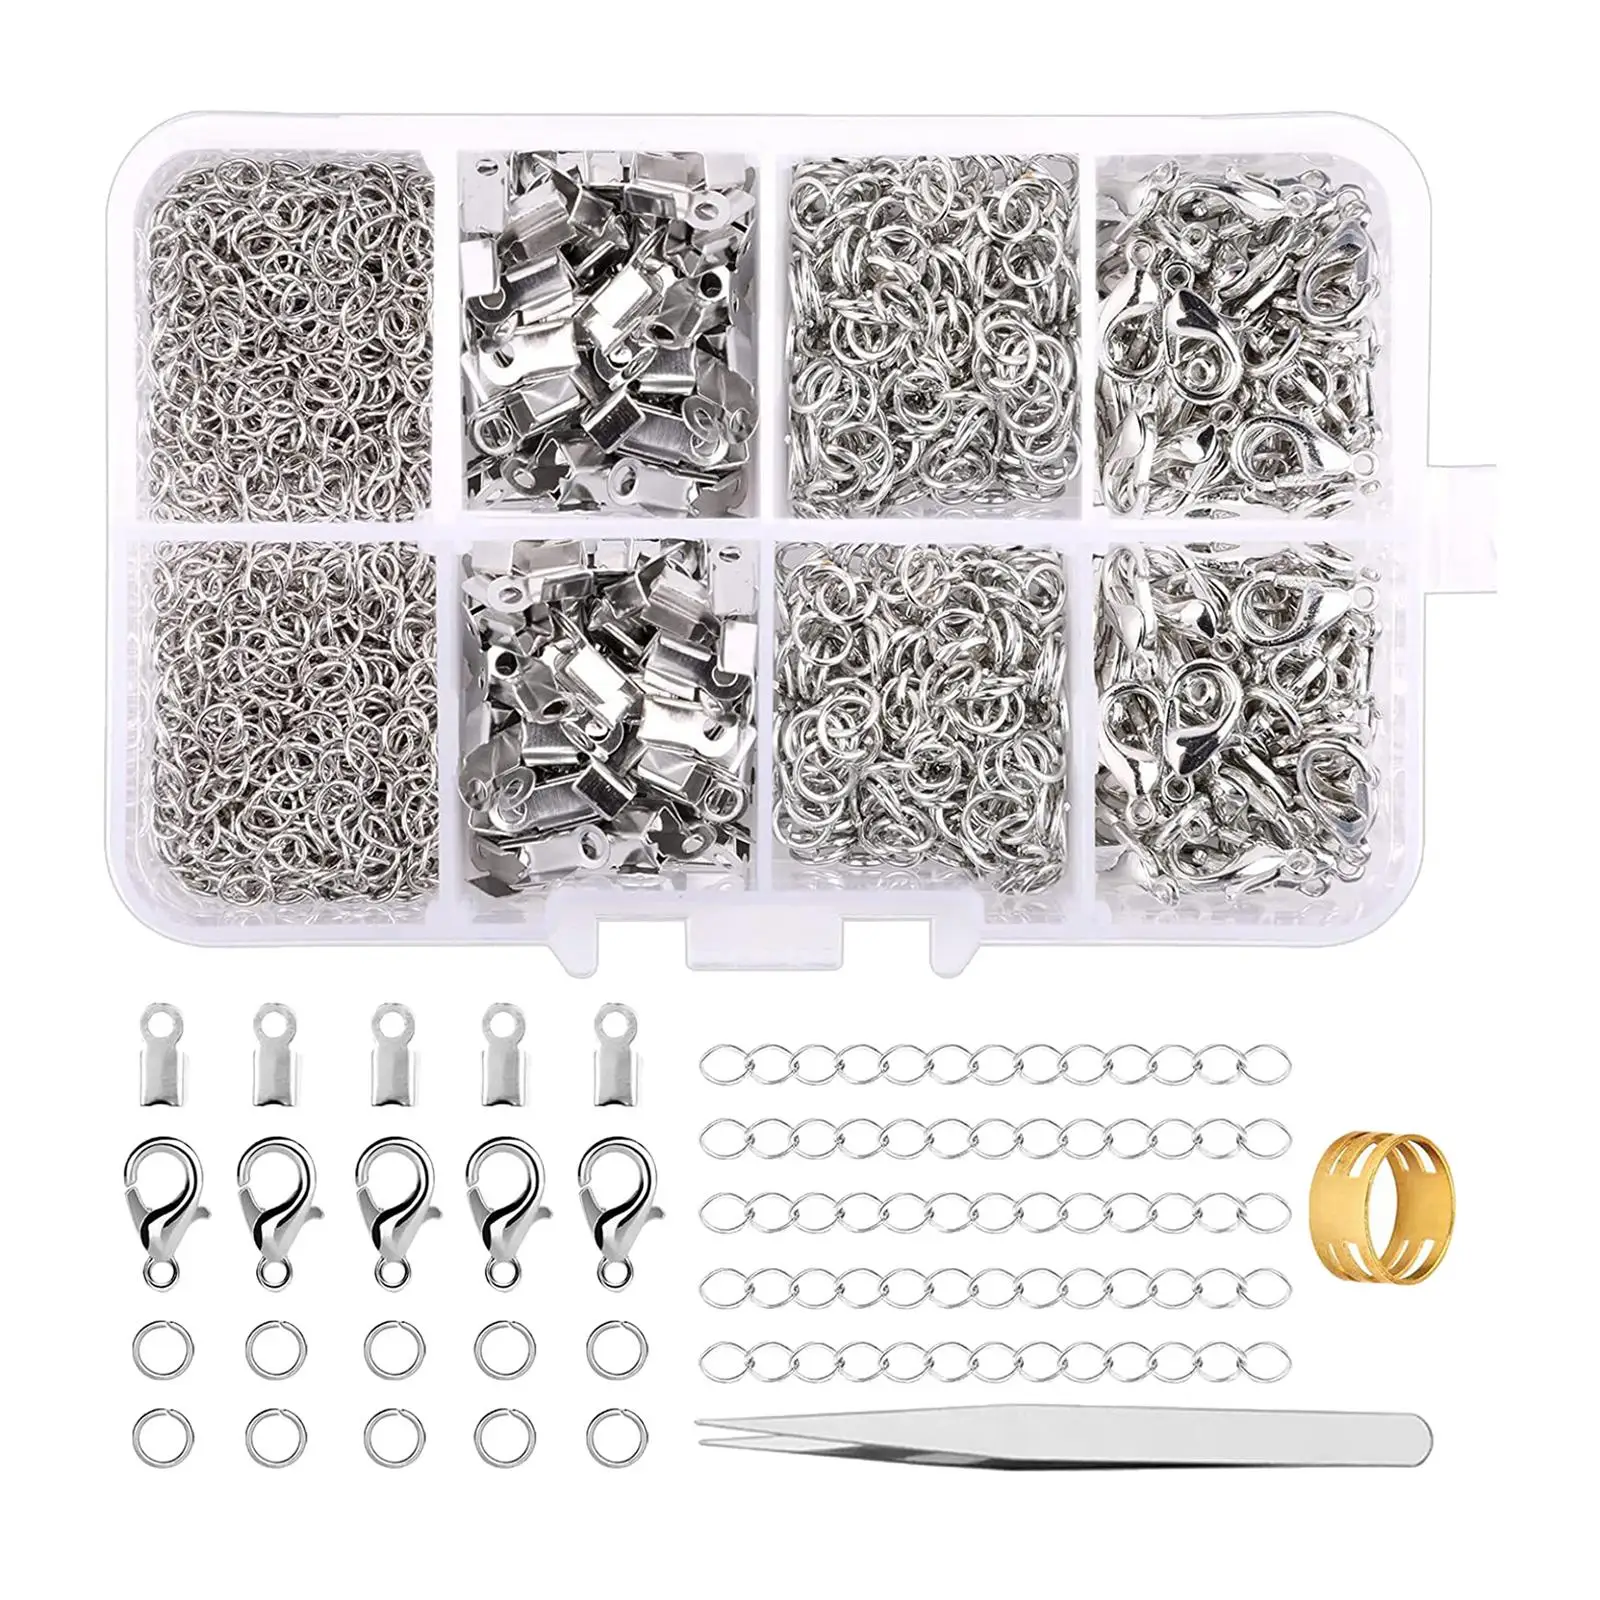 Jewelry Findings Tools Set Extension Chains Fold Over End Caps Jump Rings Opener Jewelry Making Kit for Crafts Necklace Bracelet